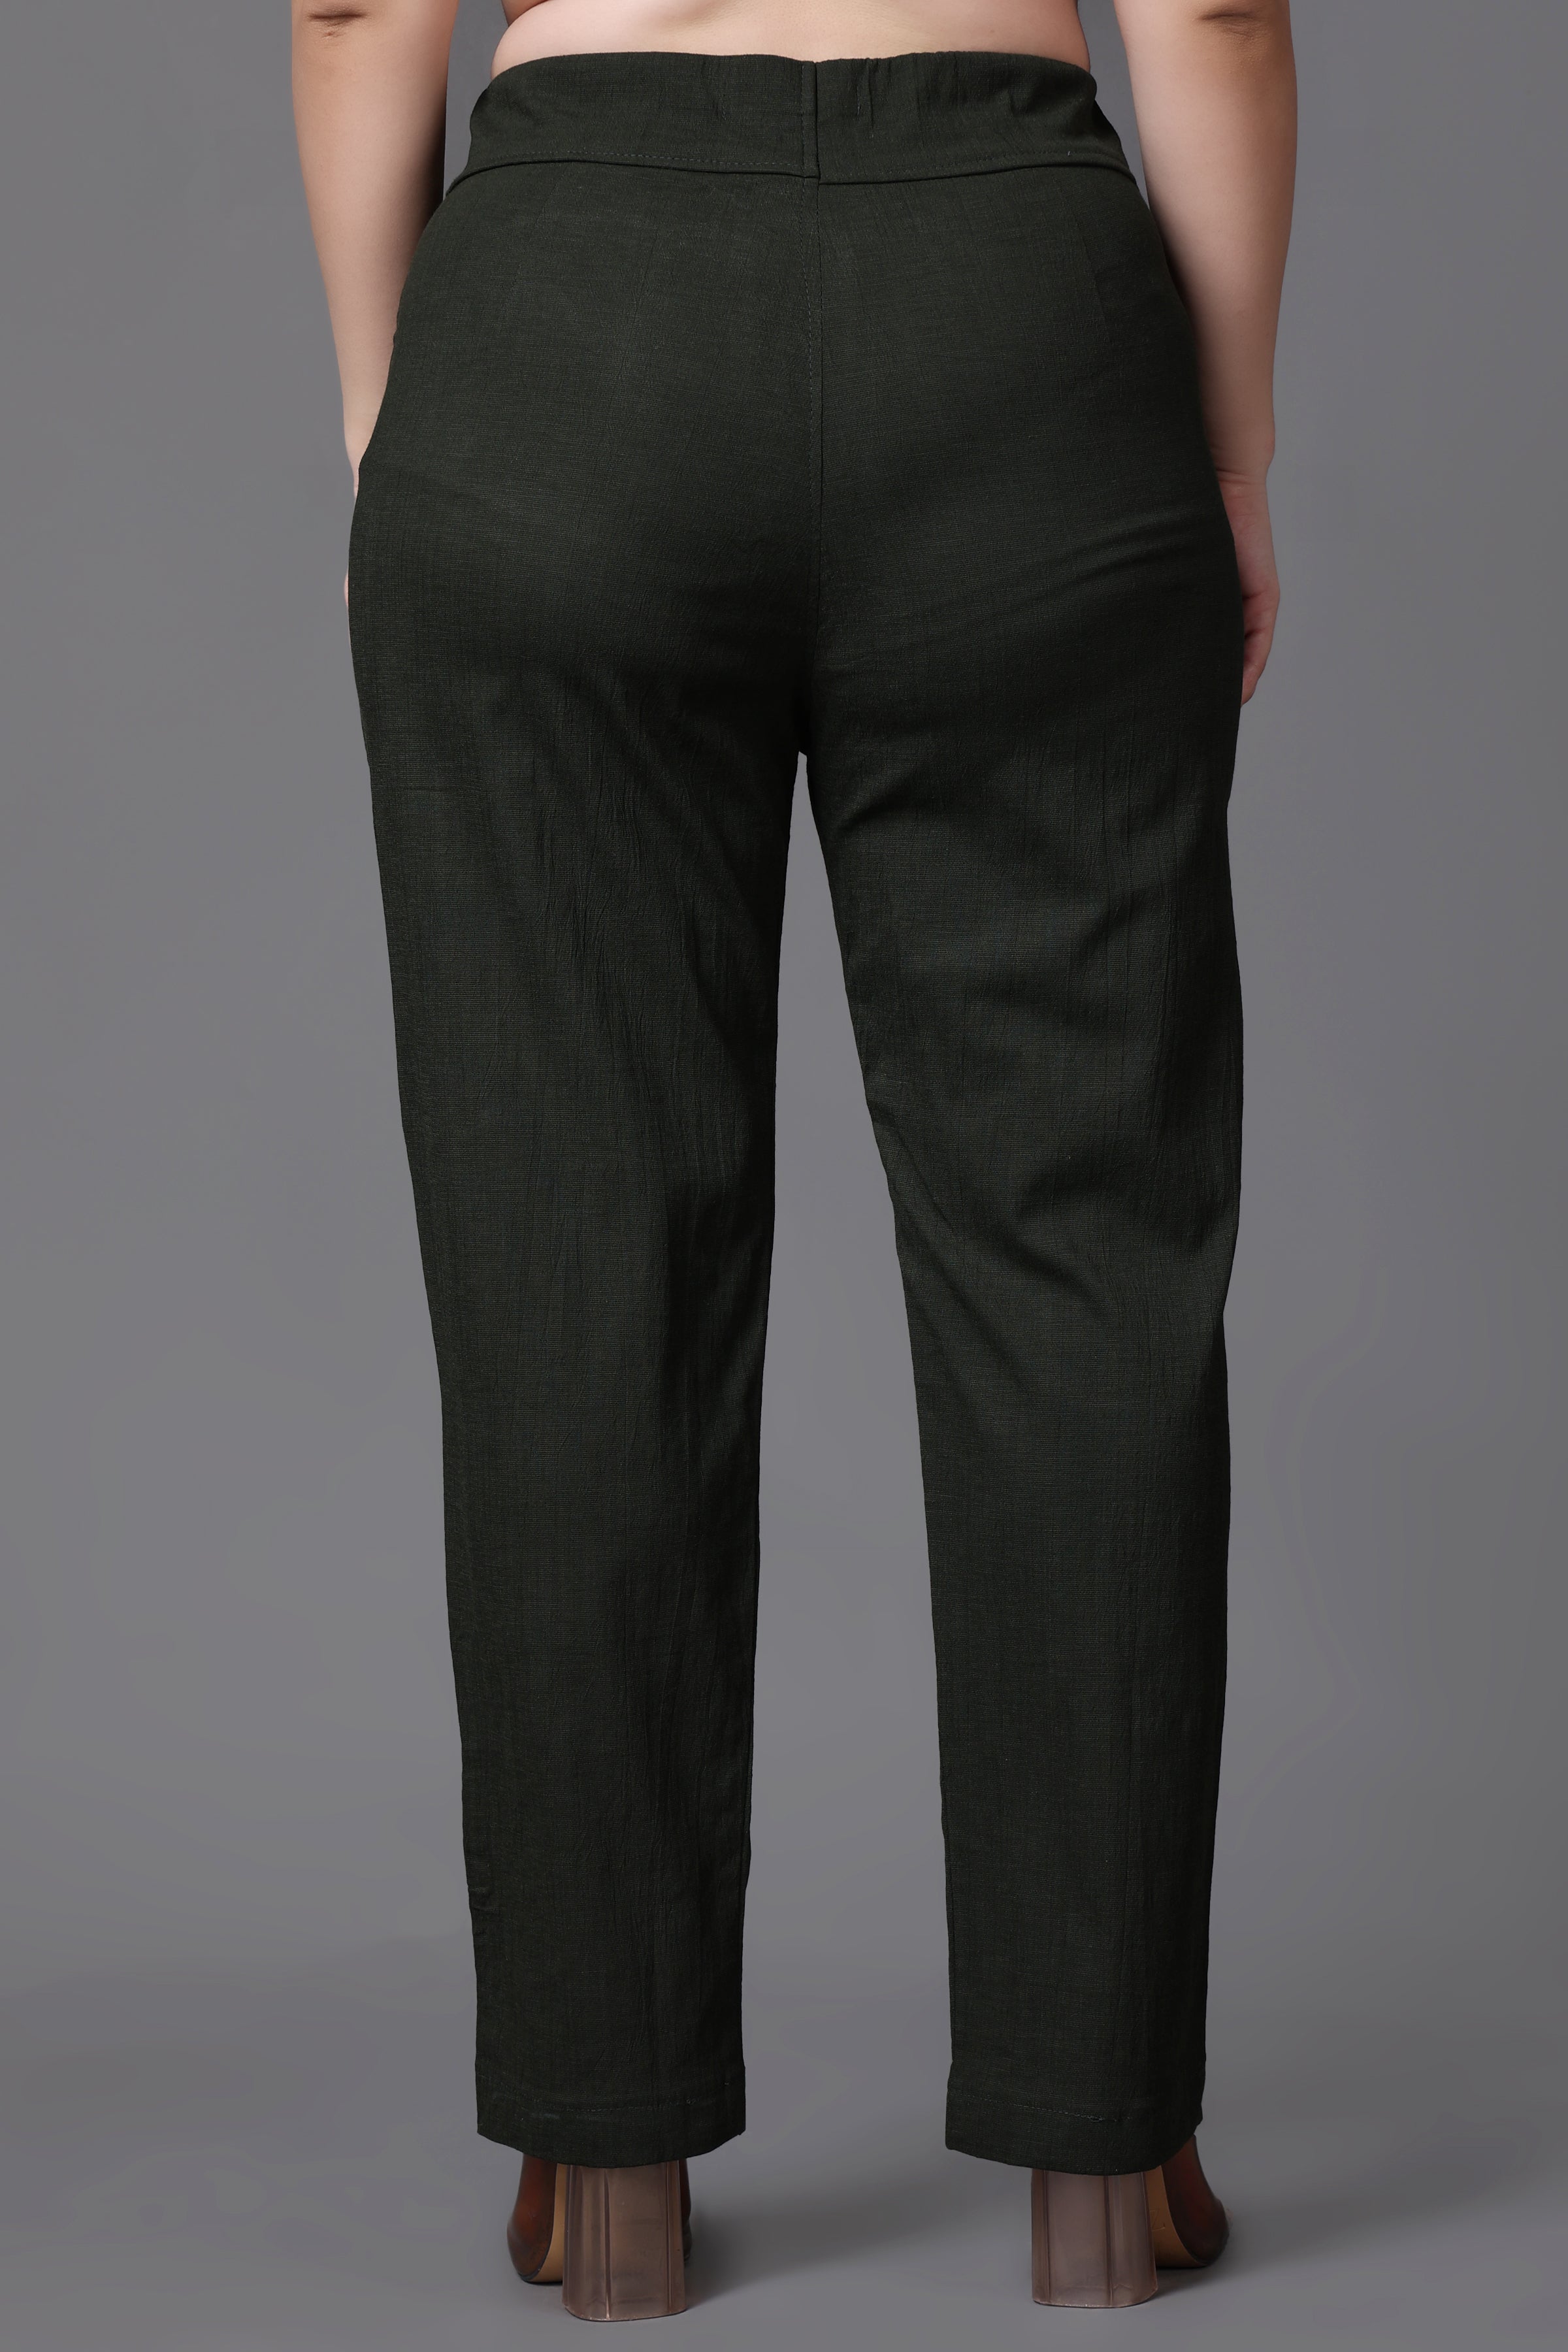 ANDTrousers and Pants BuyAND Black Straight Fit Formal Pants